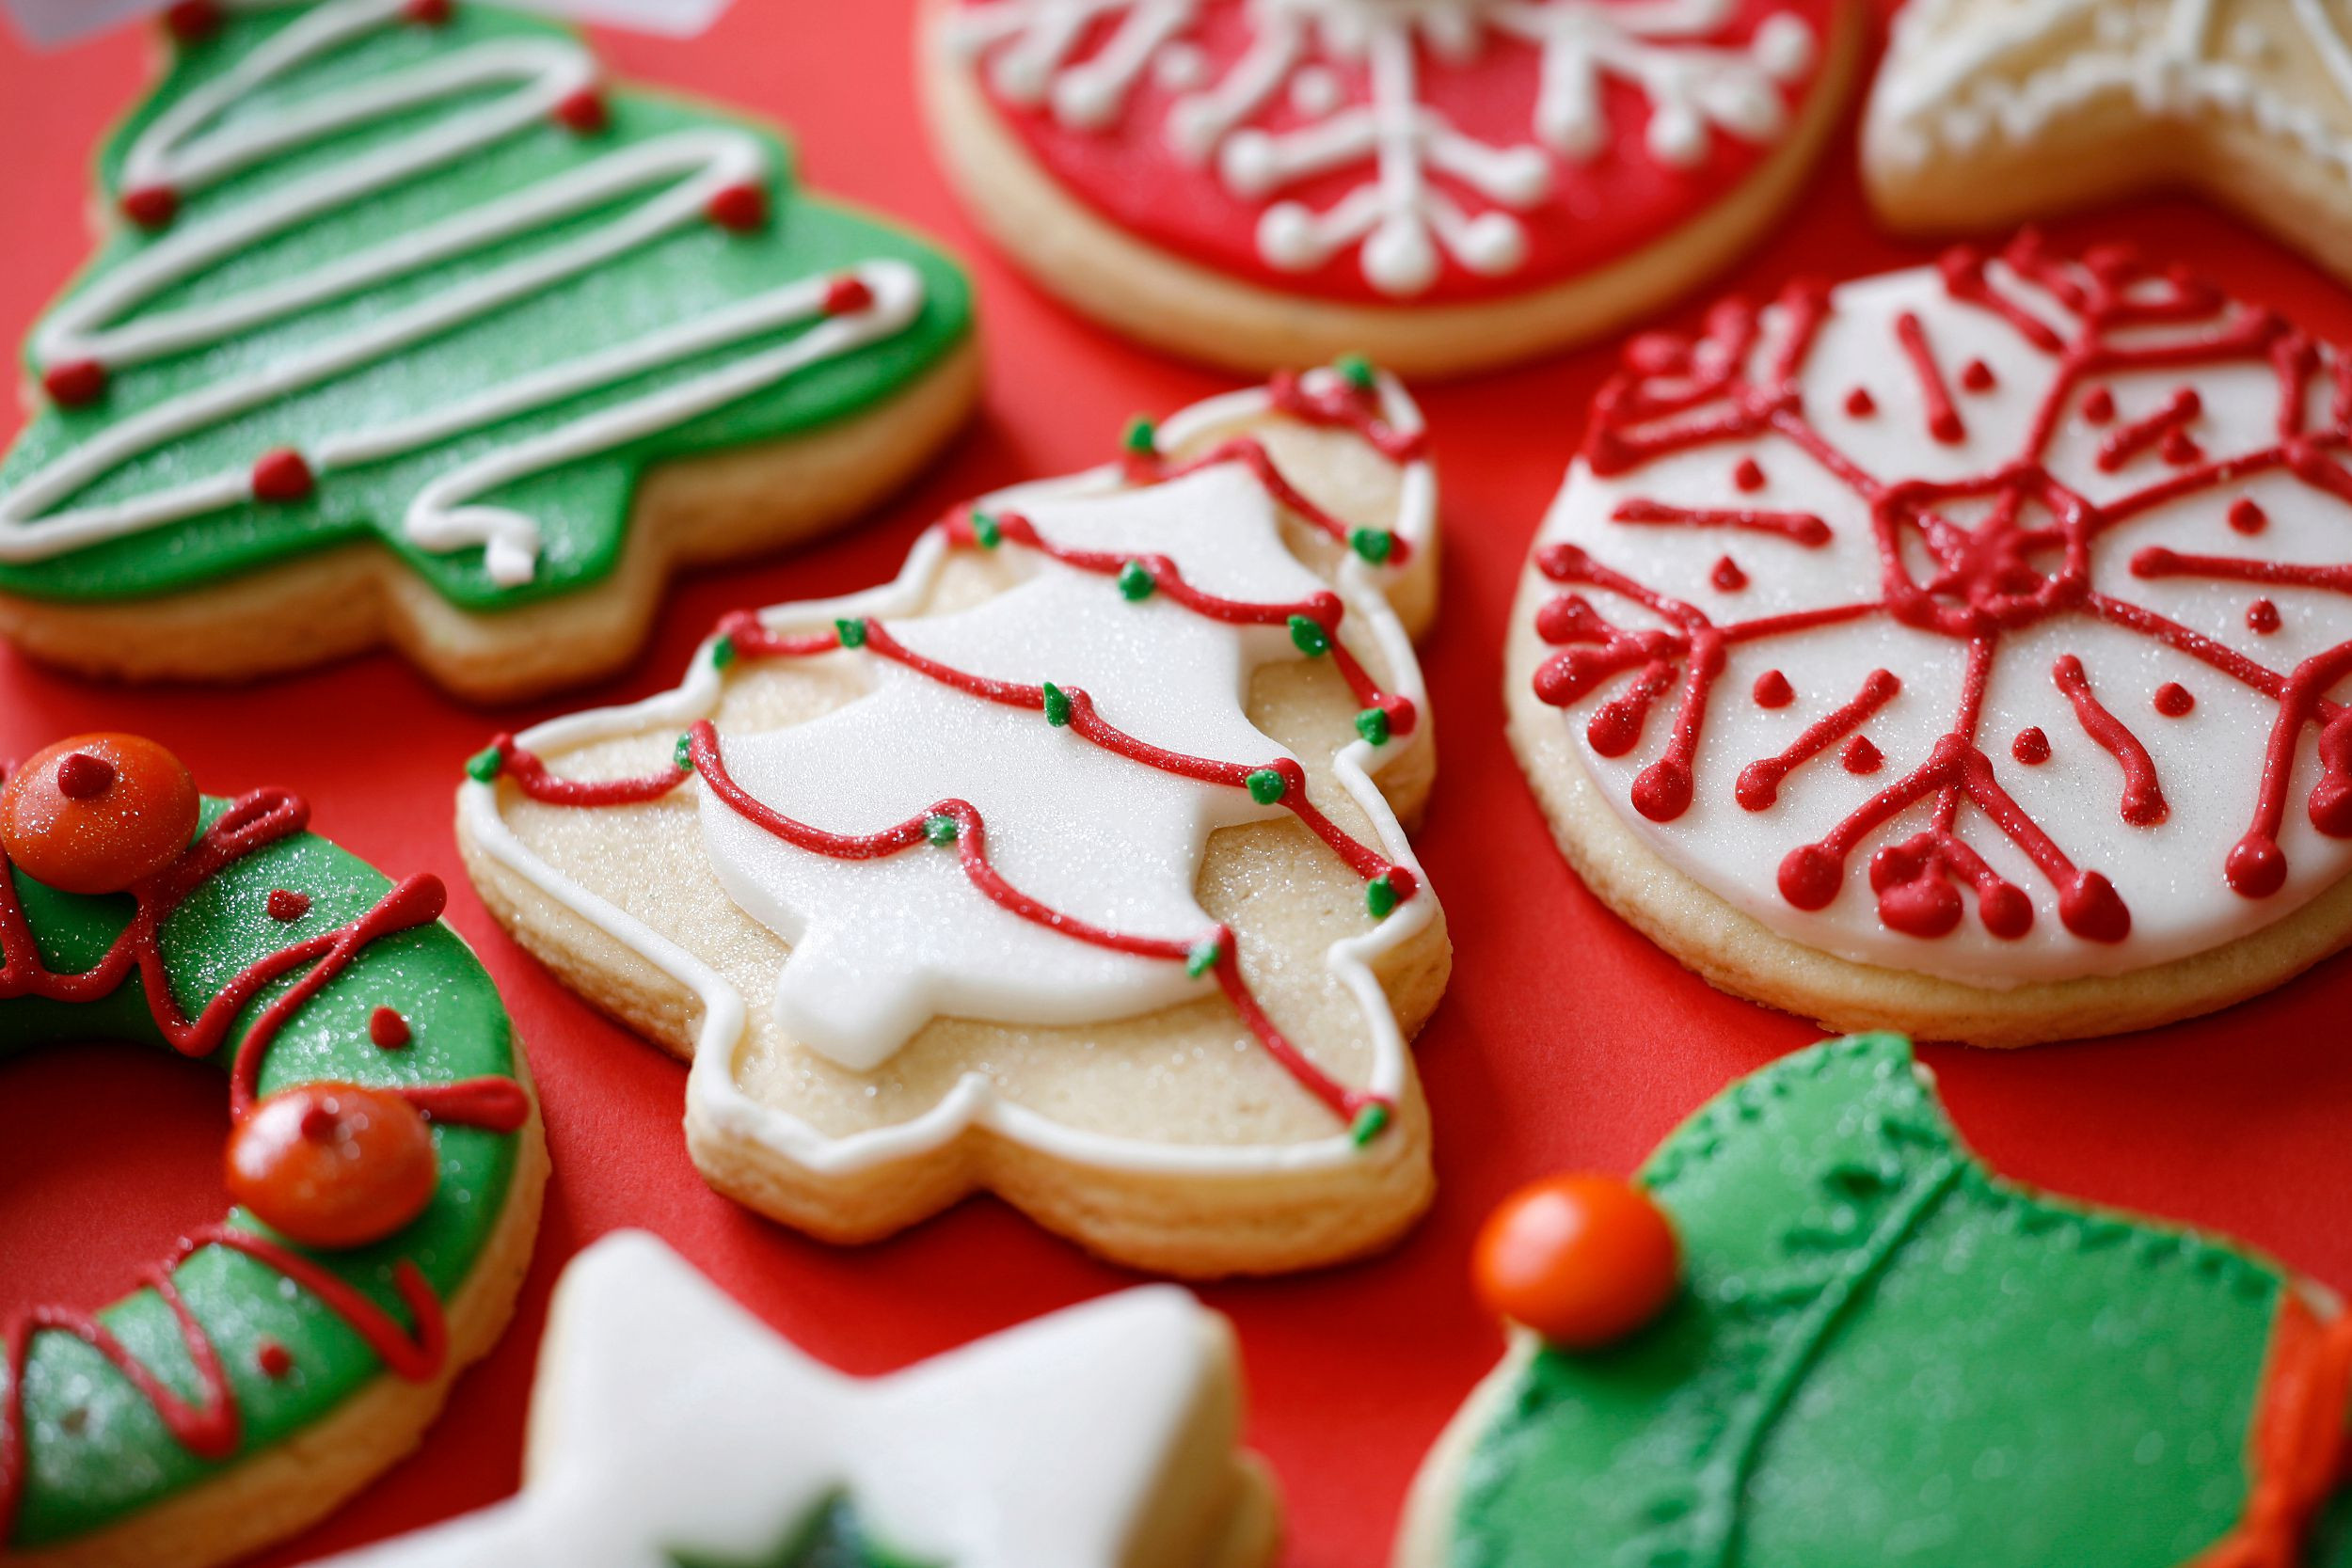 Decorating Christmas Cookies With Royal Icing
 Royal Icing Recipe for Decorating Cookies